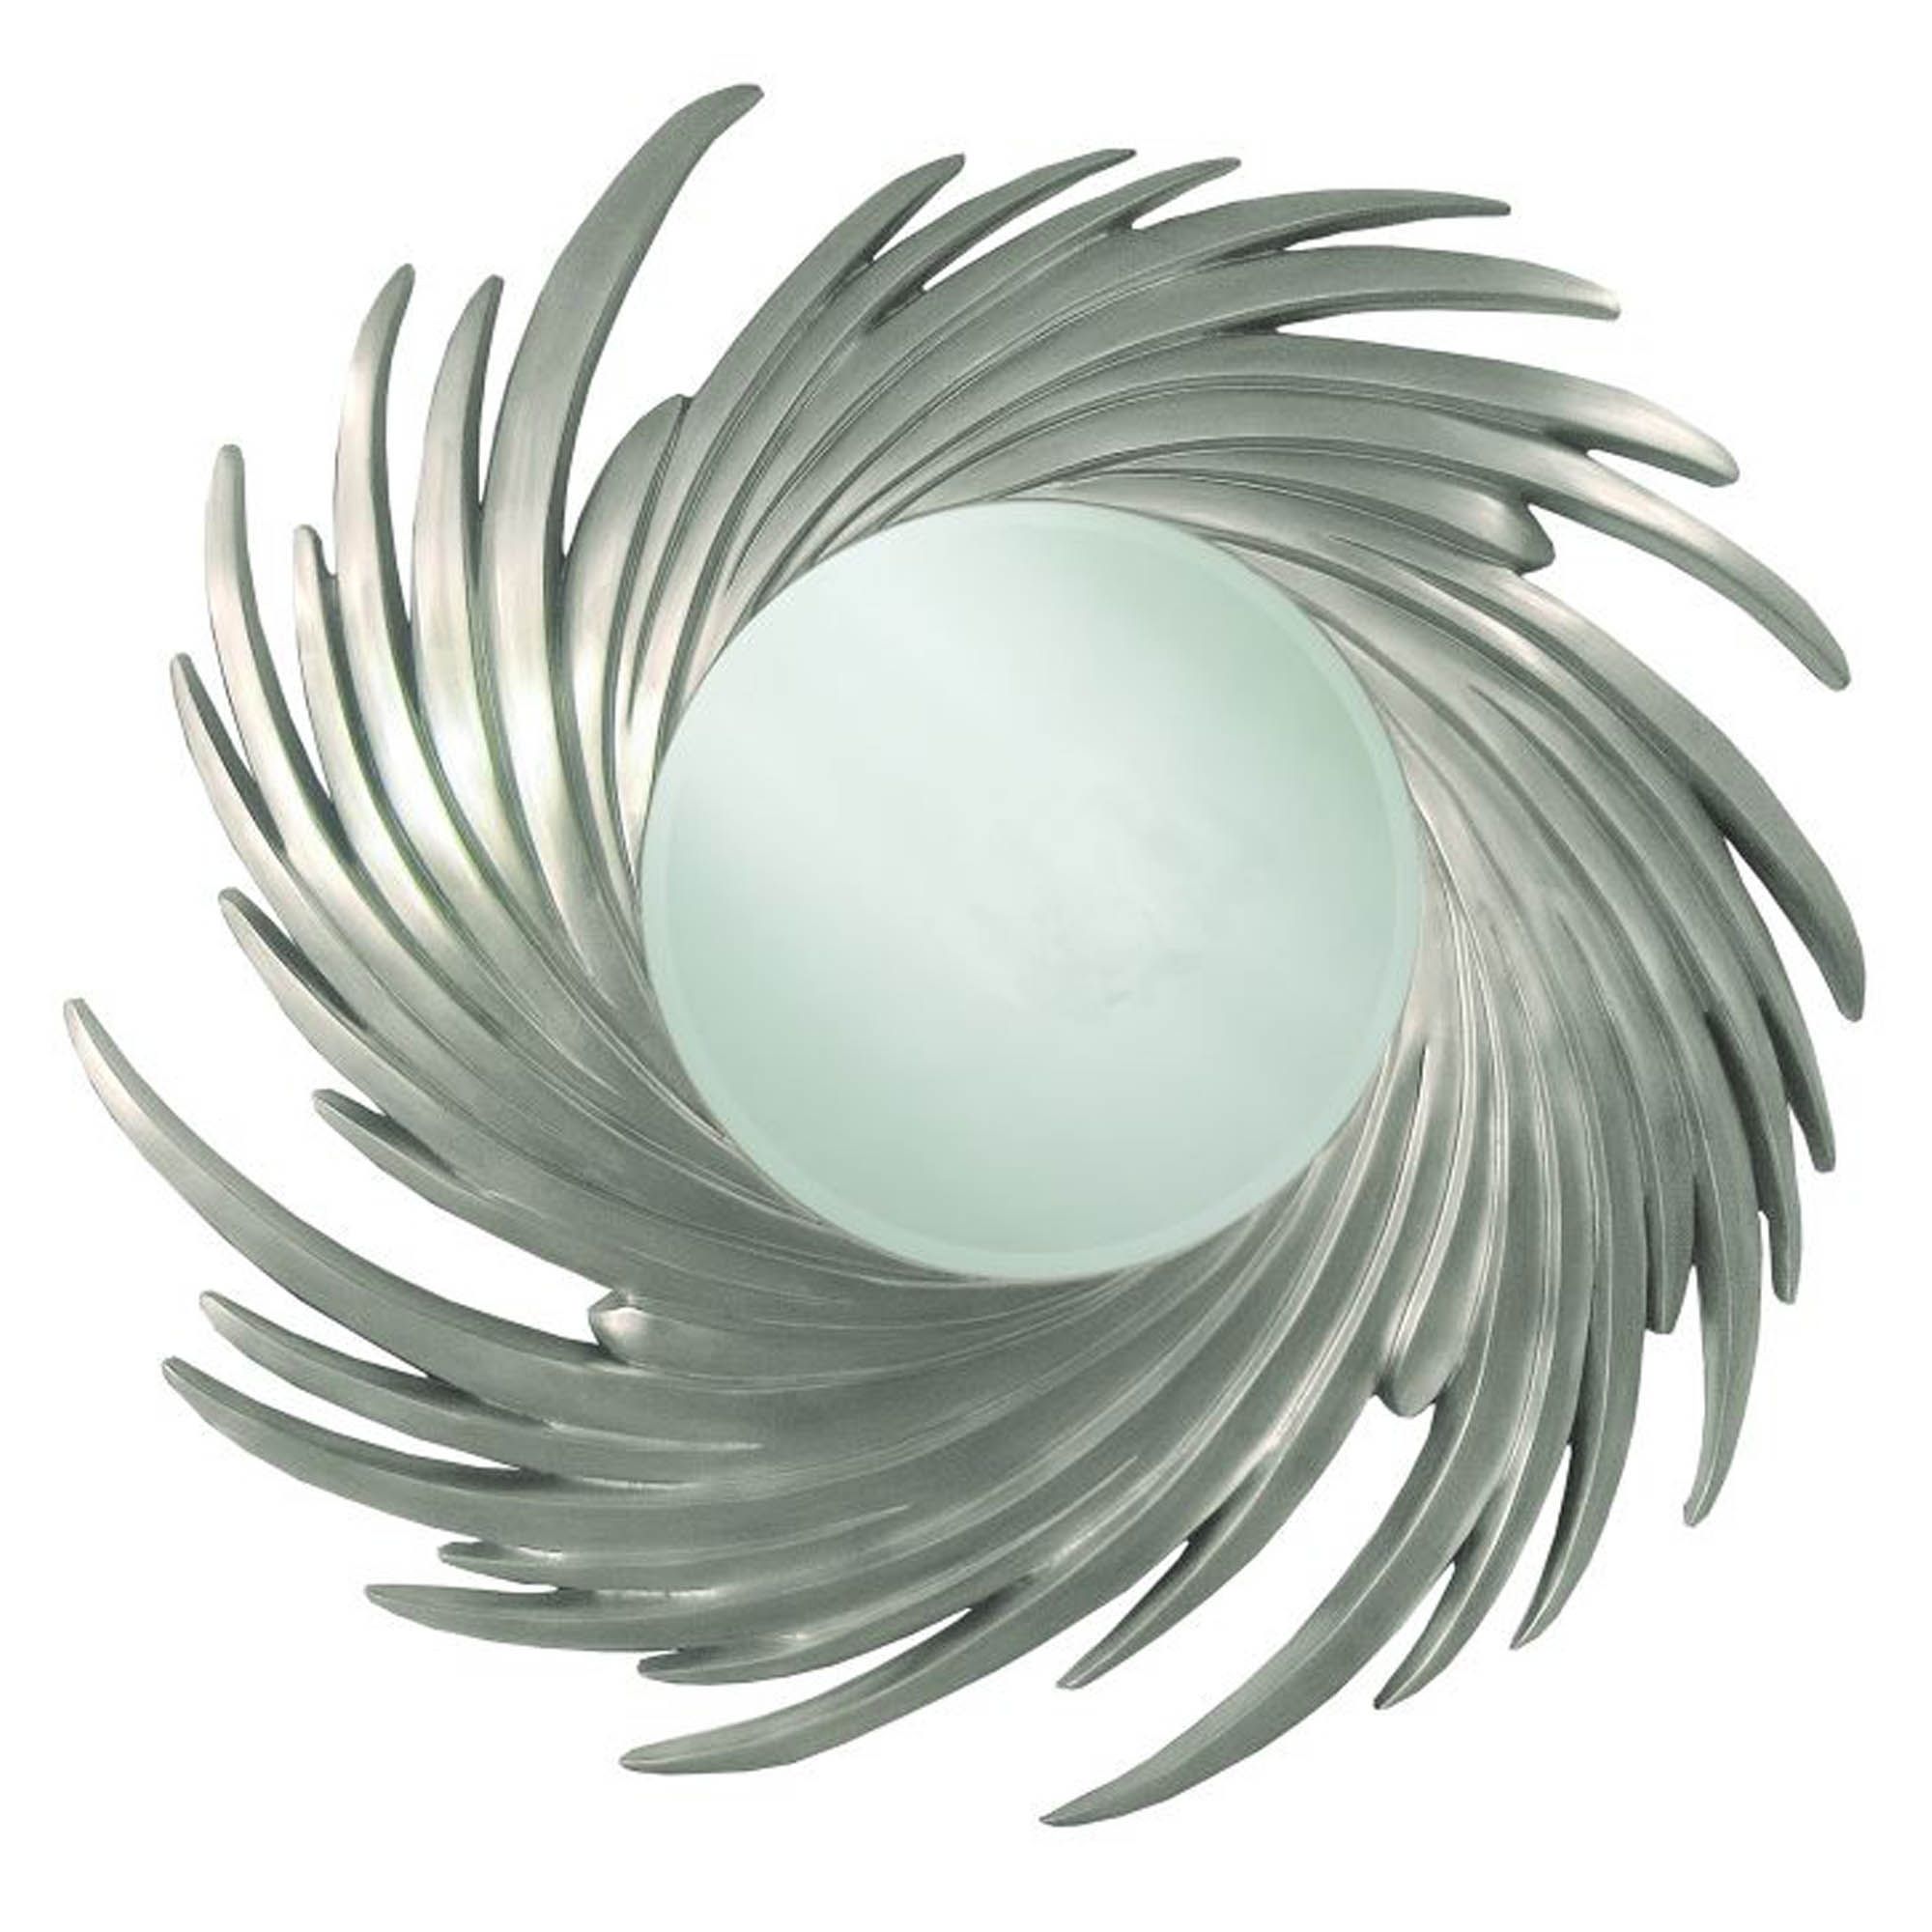 Silver Swirl Round Contemporary Wall Mirror | Homesdirect365 Intended For Round Modern Wall Mirrors (View 13 of 15)